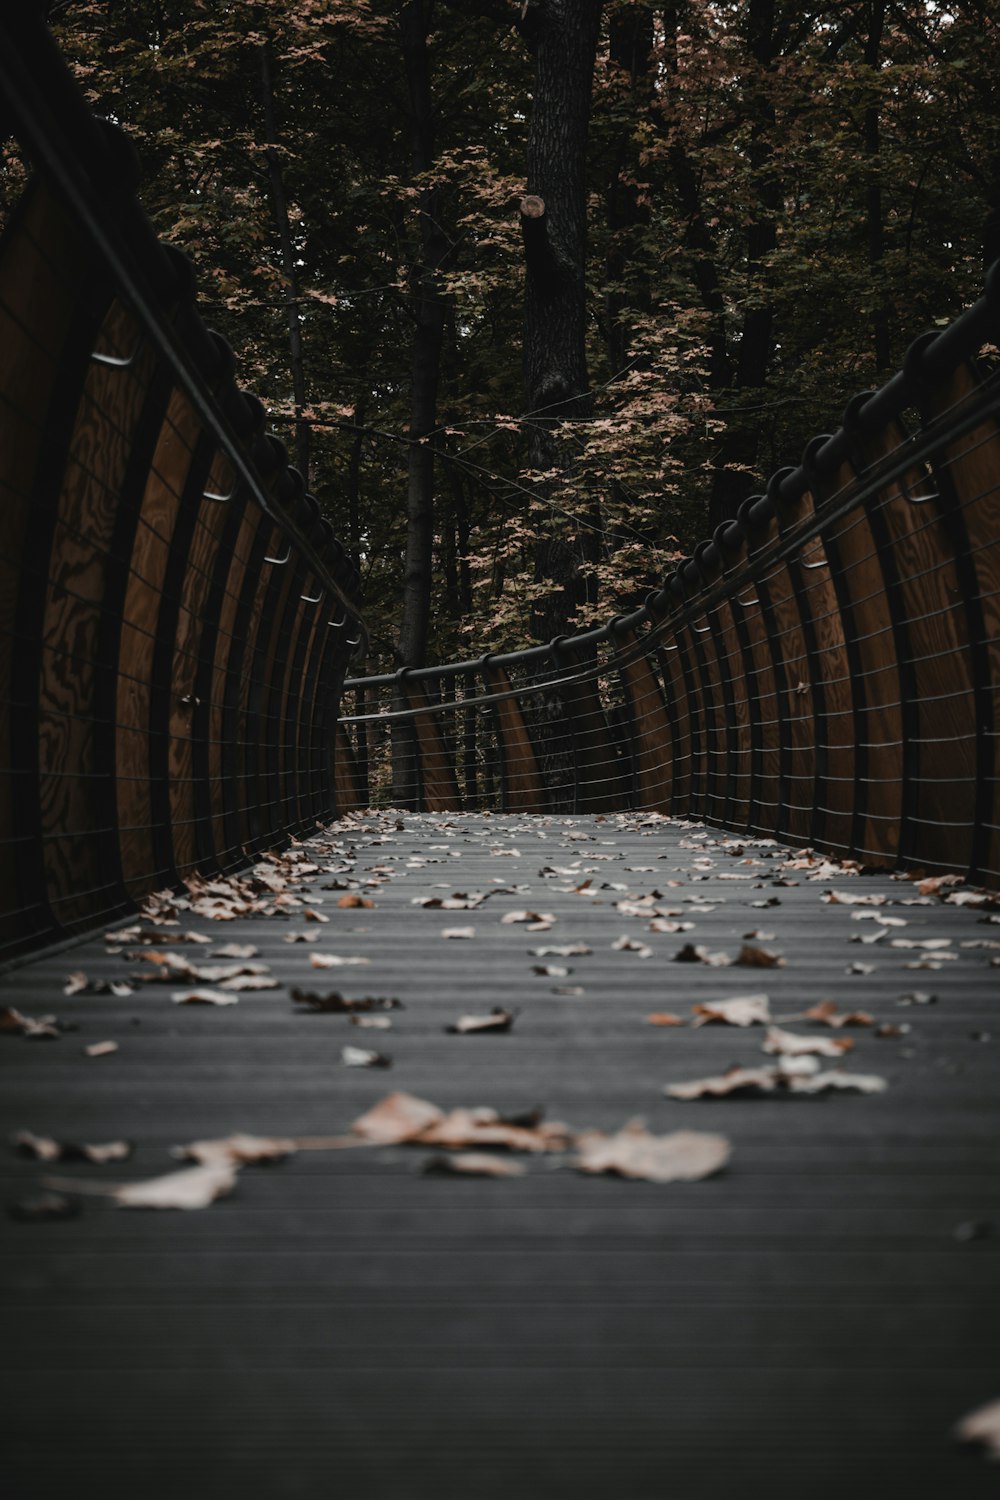 brown wooden bridge with white leaves on the ground